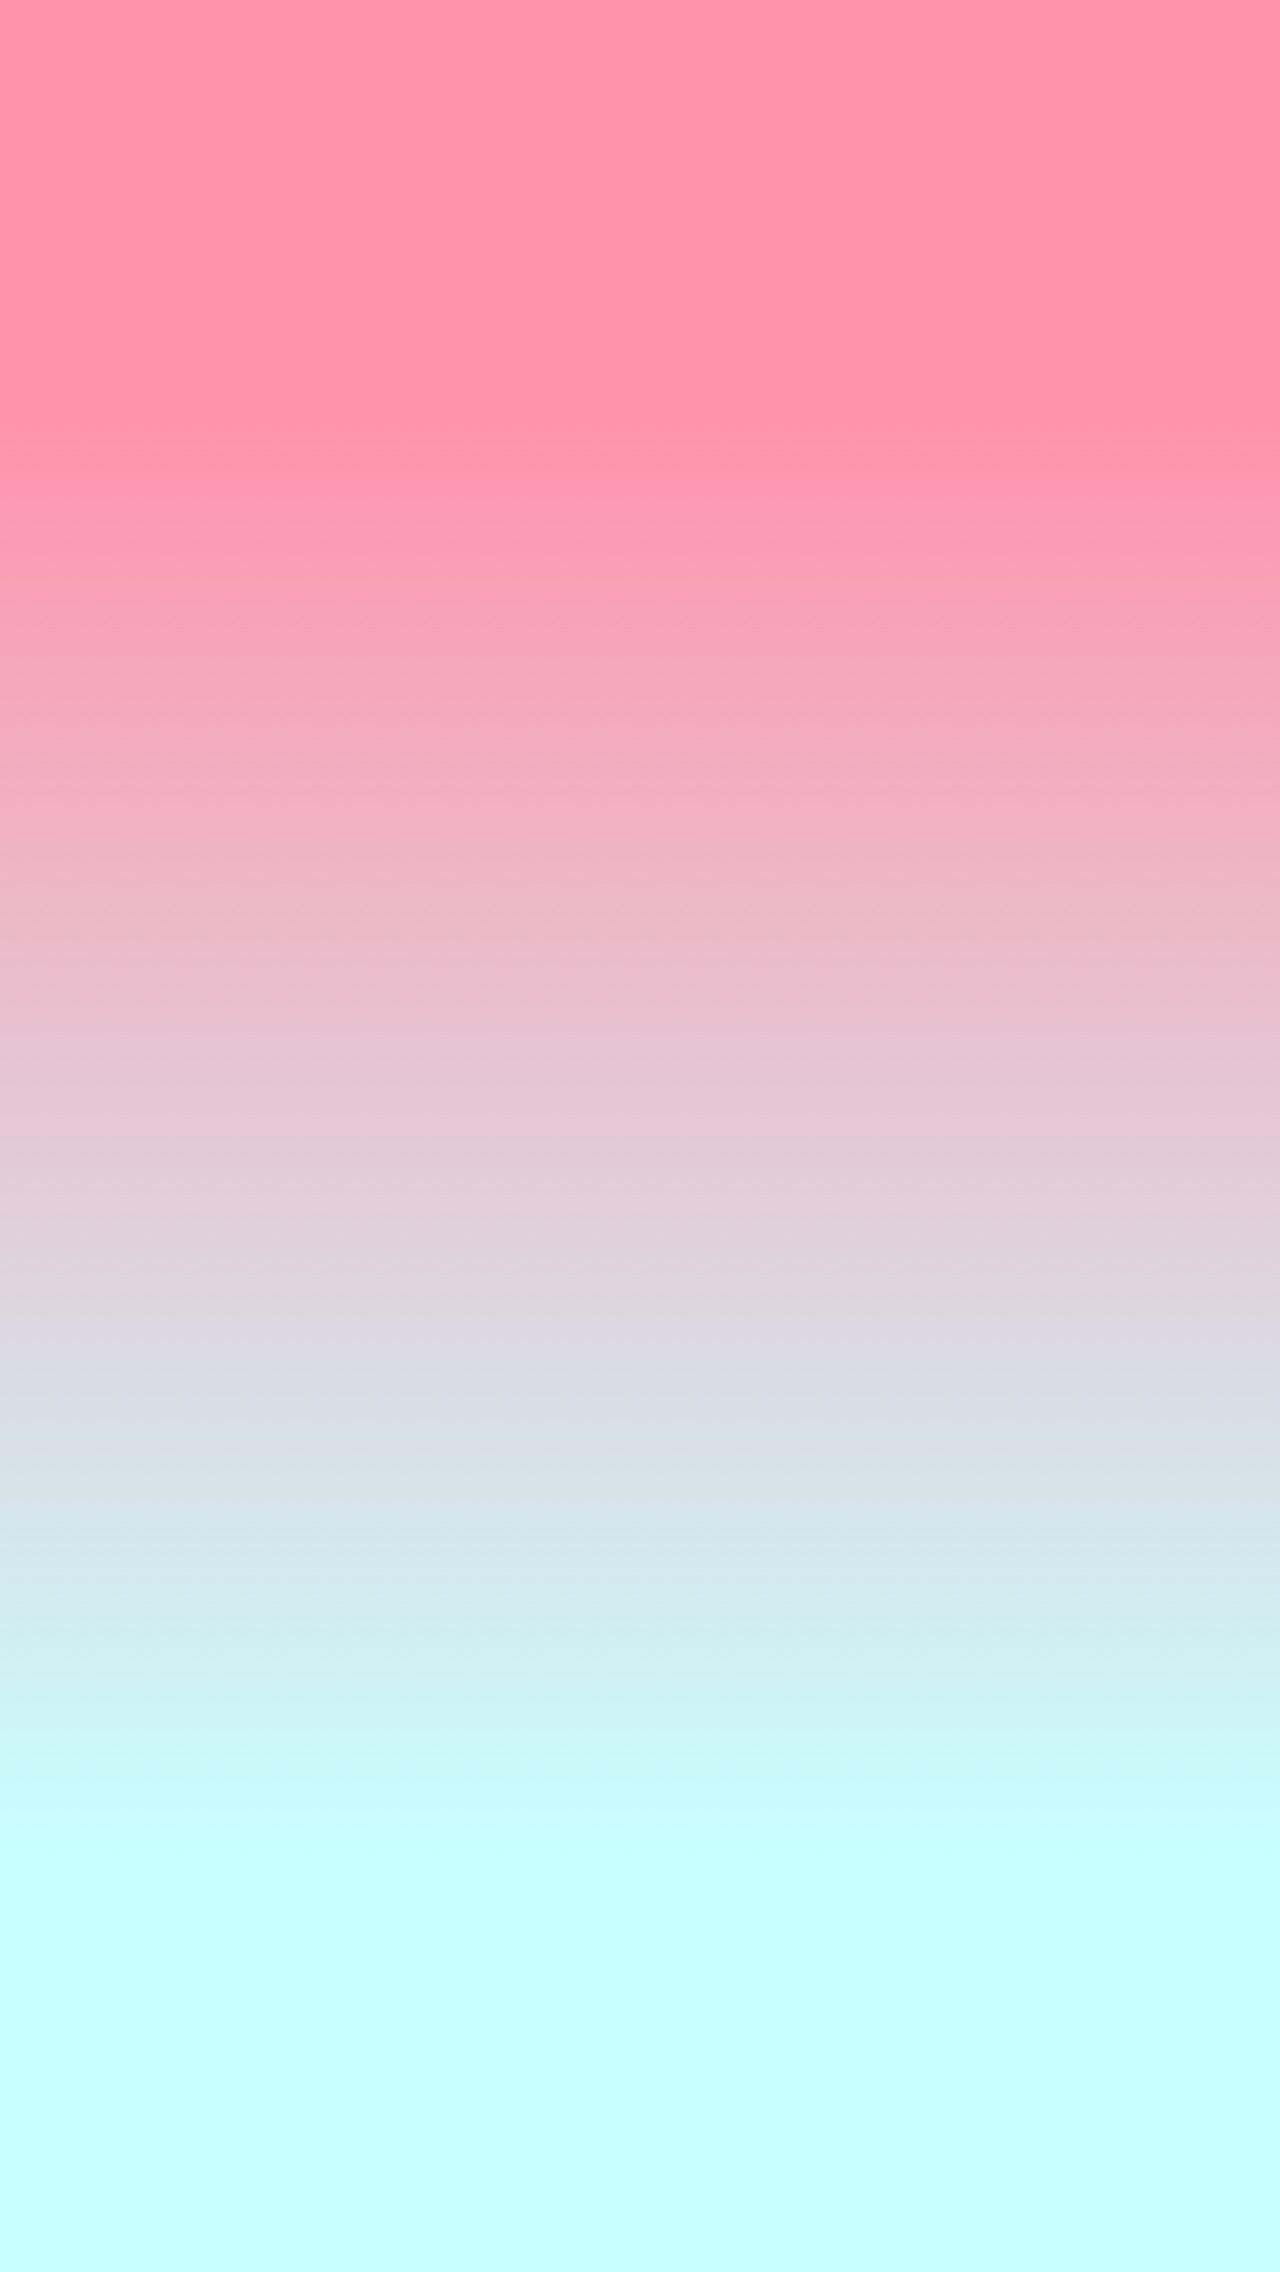 Pink and blue ombre iphone wallpaper. iPhone wallpaper